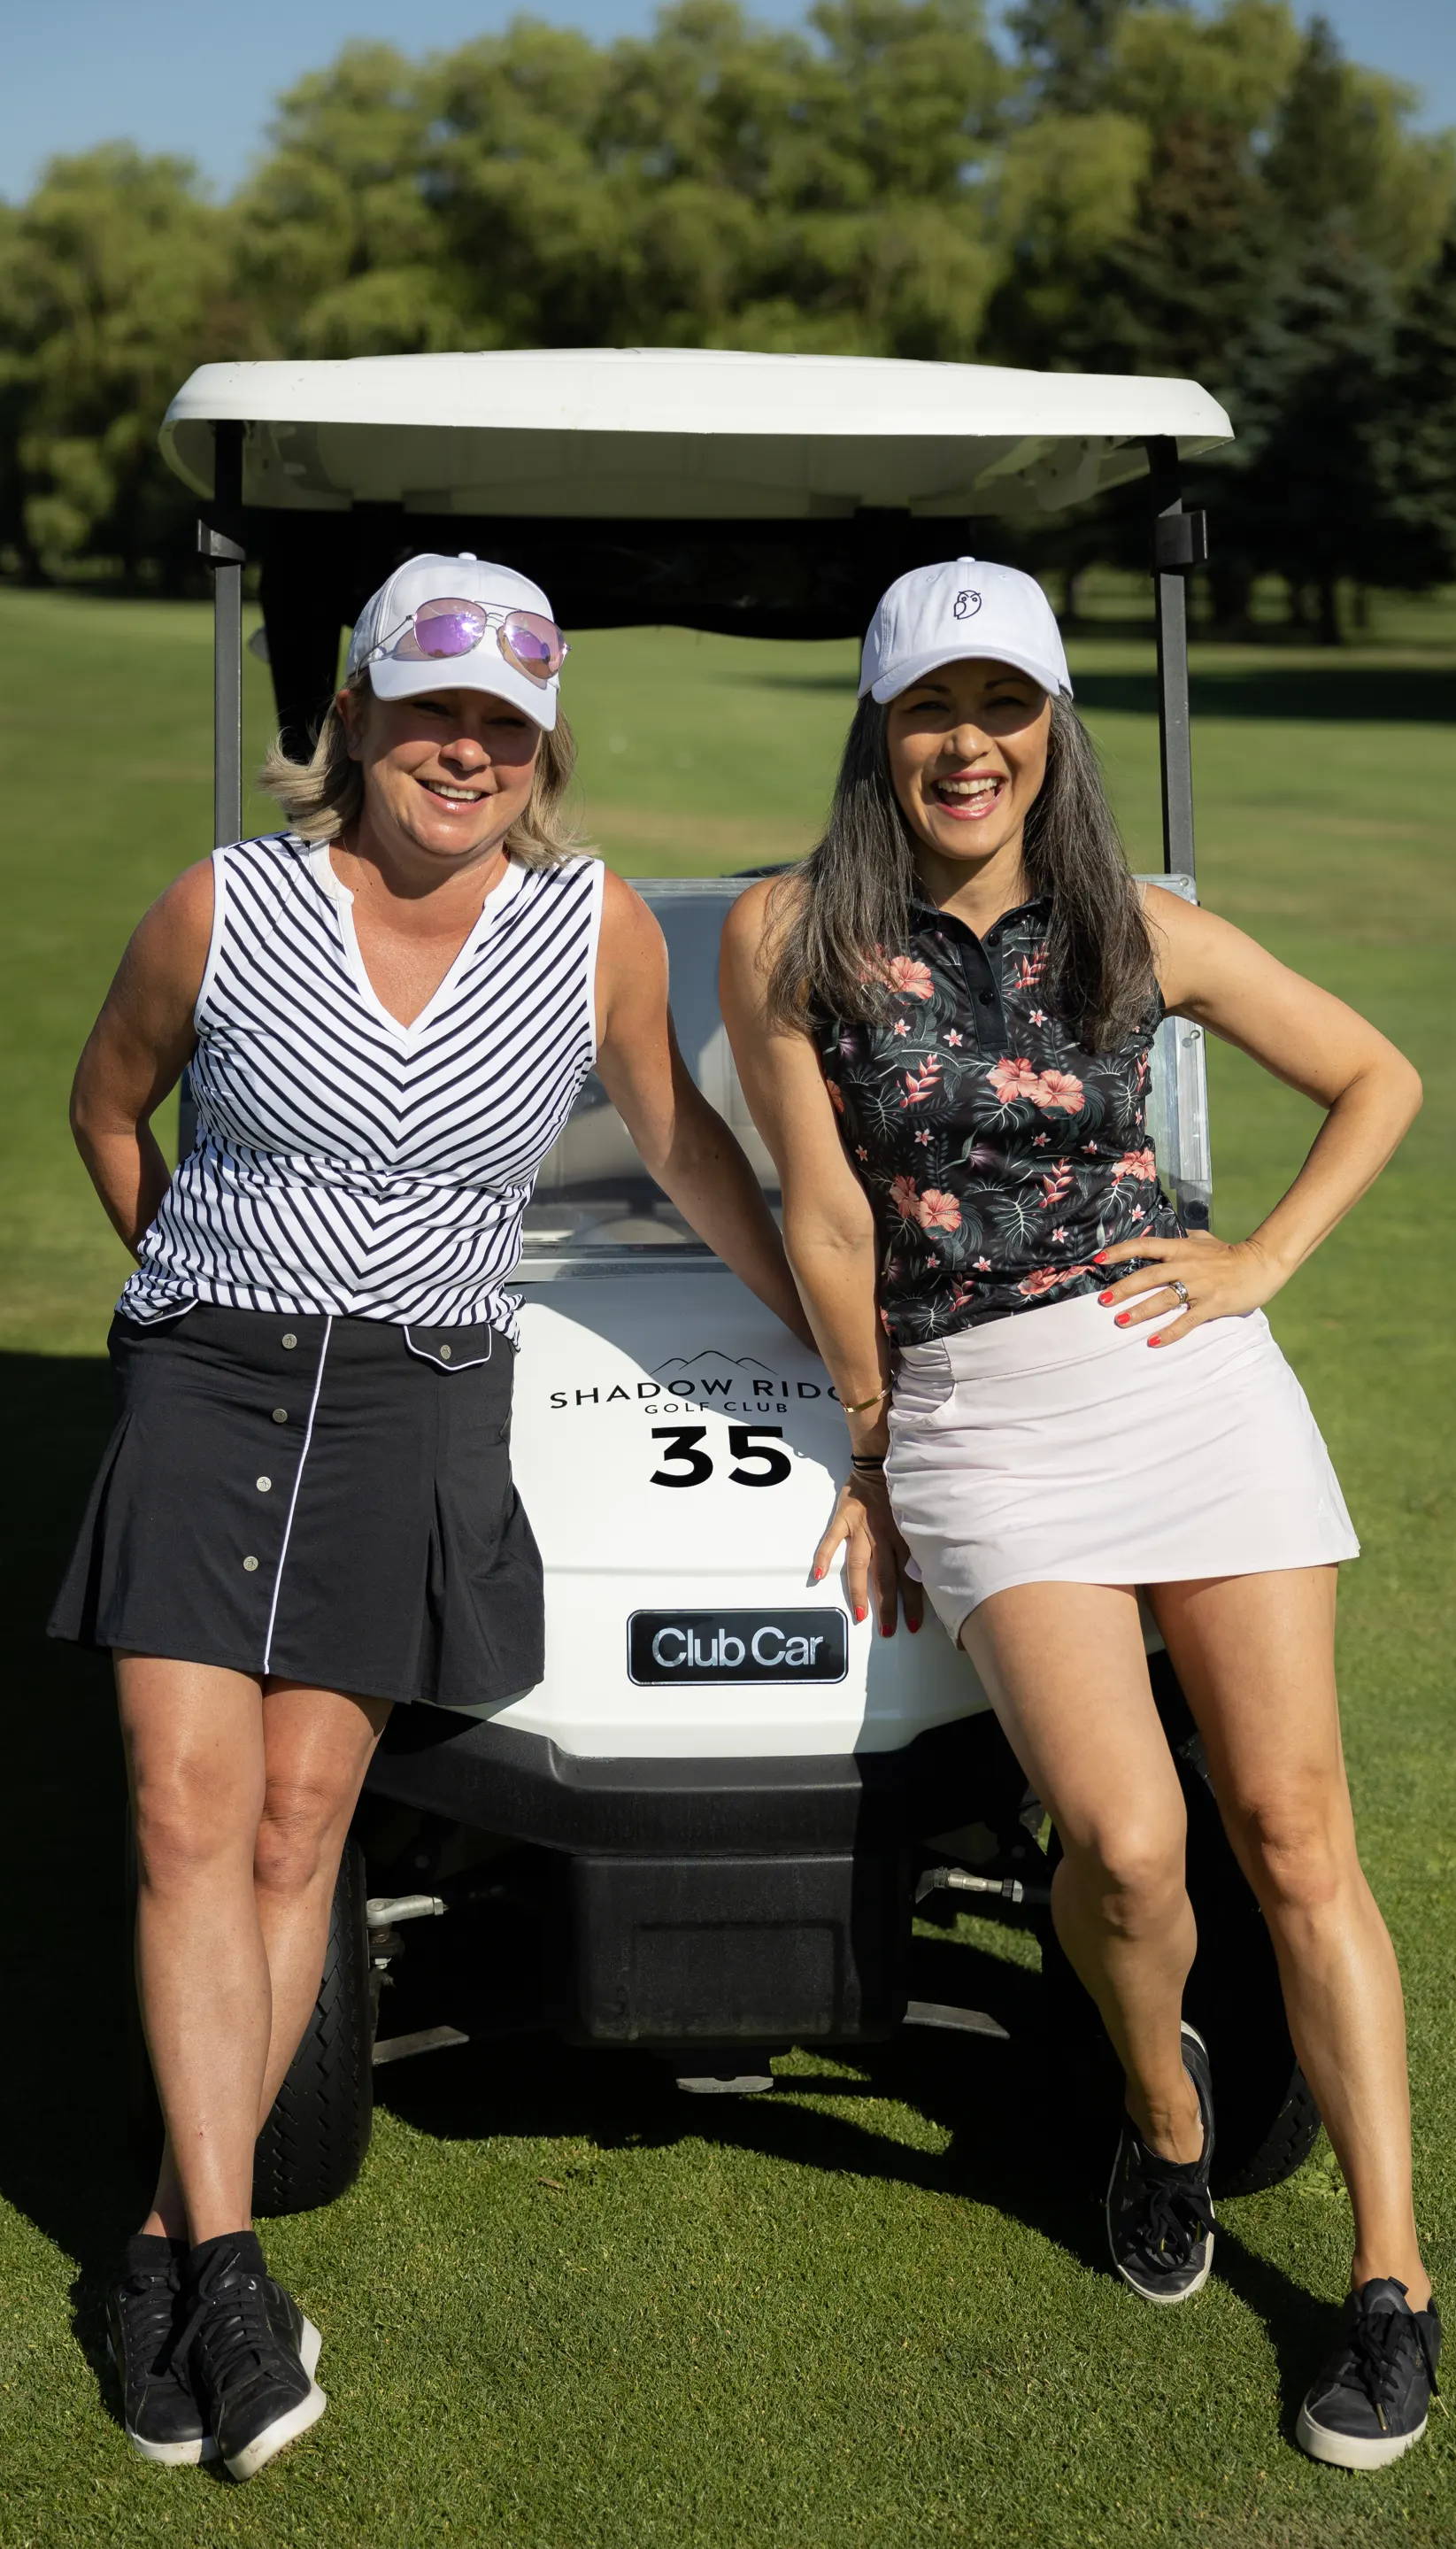 Two female golf entrepreneurs in golf apparel lean against a golf cart on a golf coure in summer.